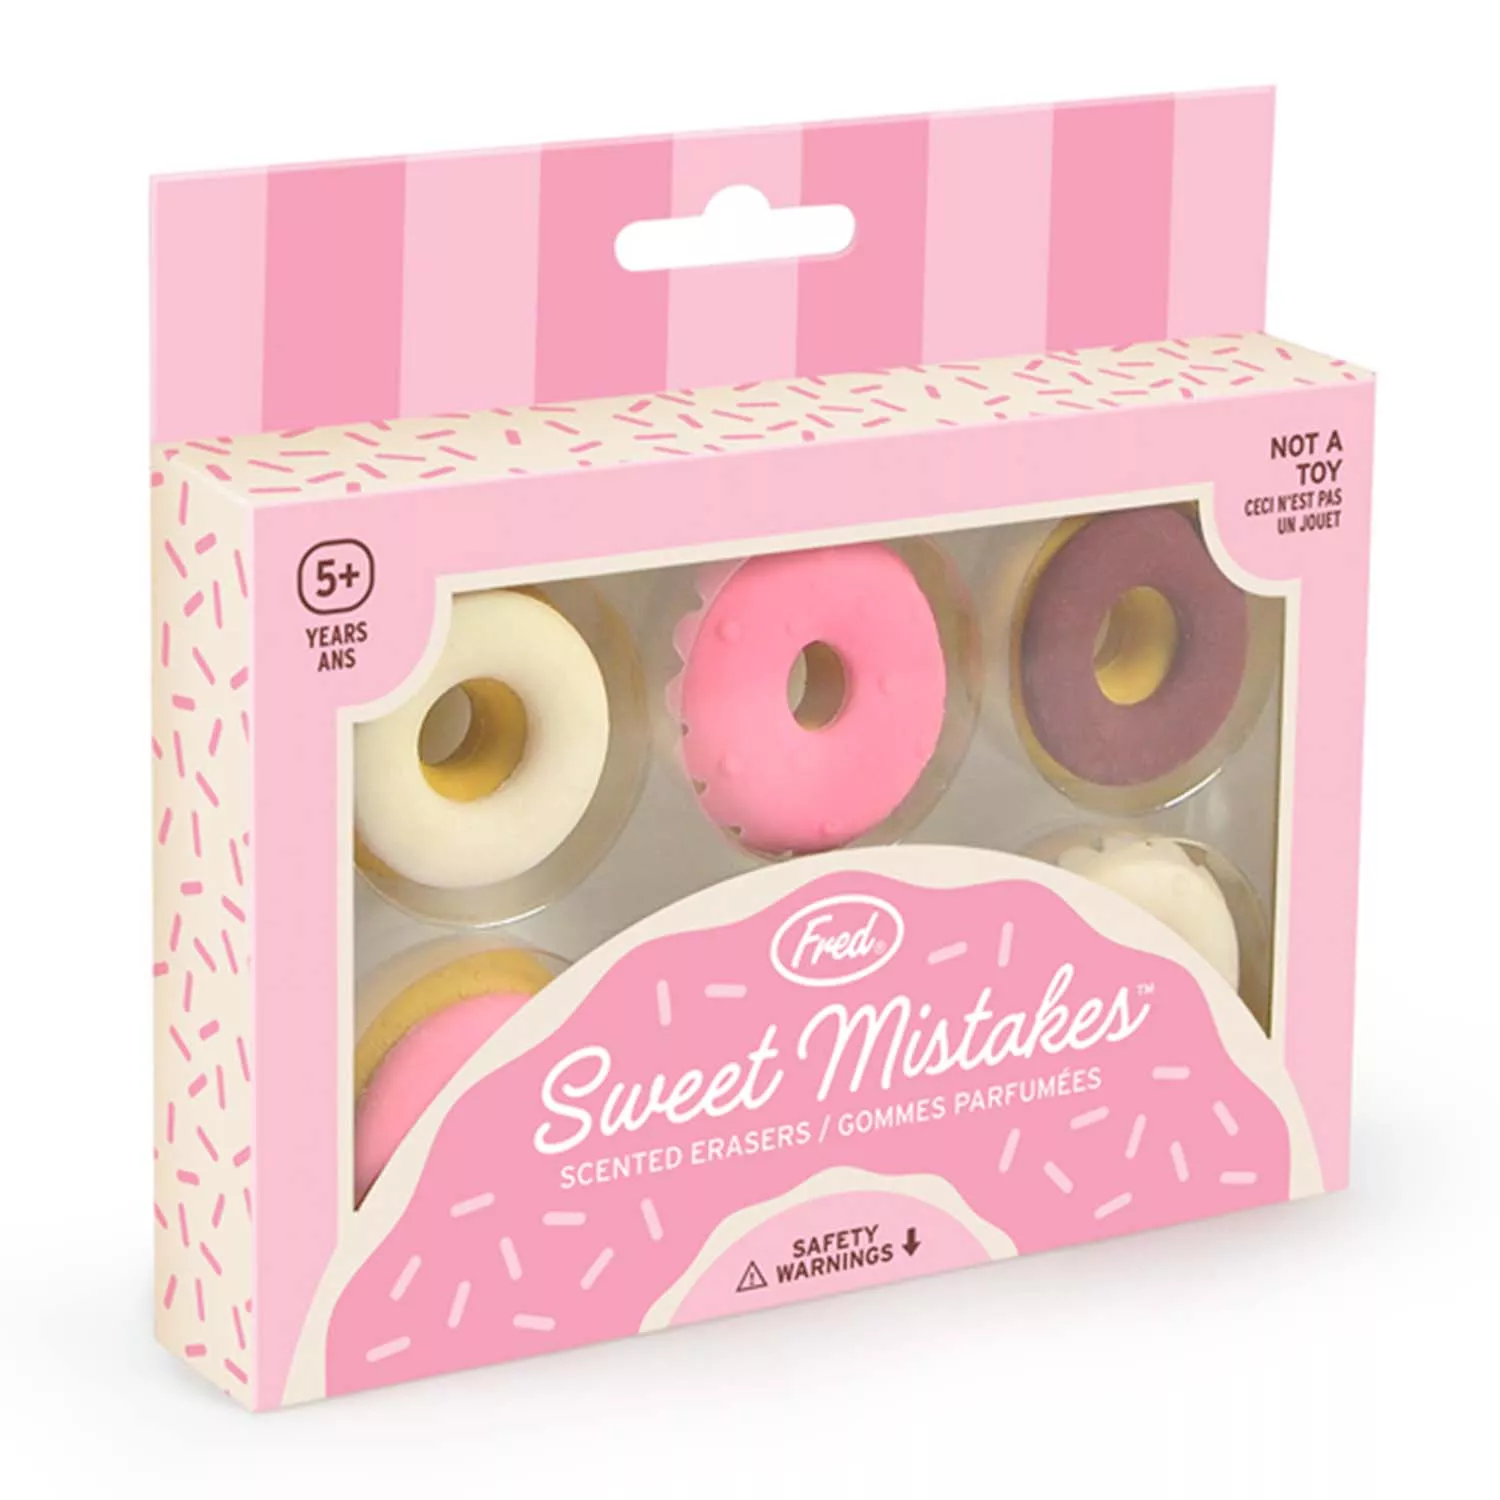 Fred Sweet Mistakes Scented Donut Erasers, Set of 6